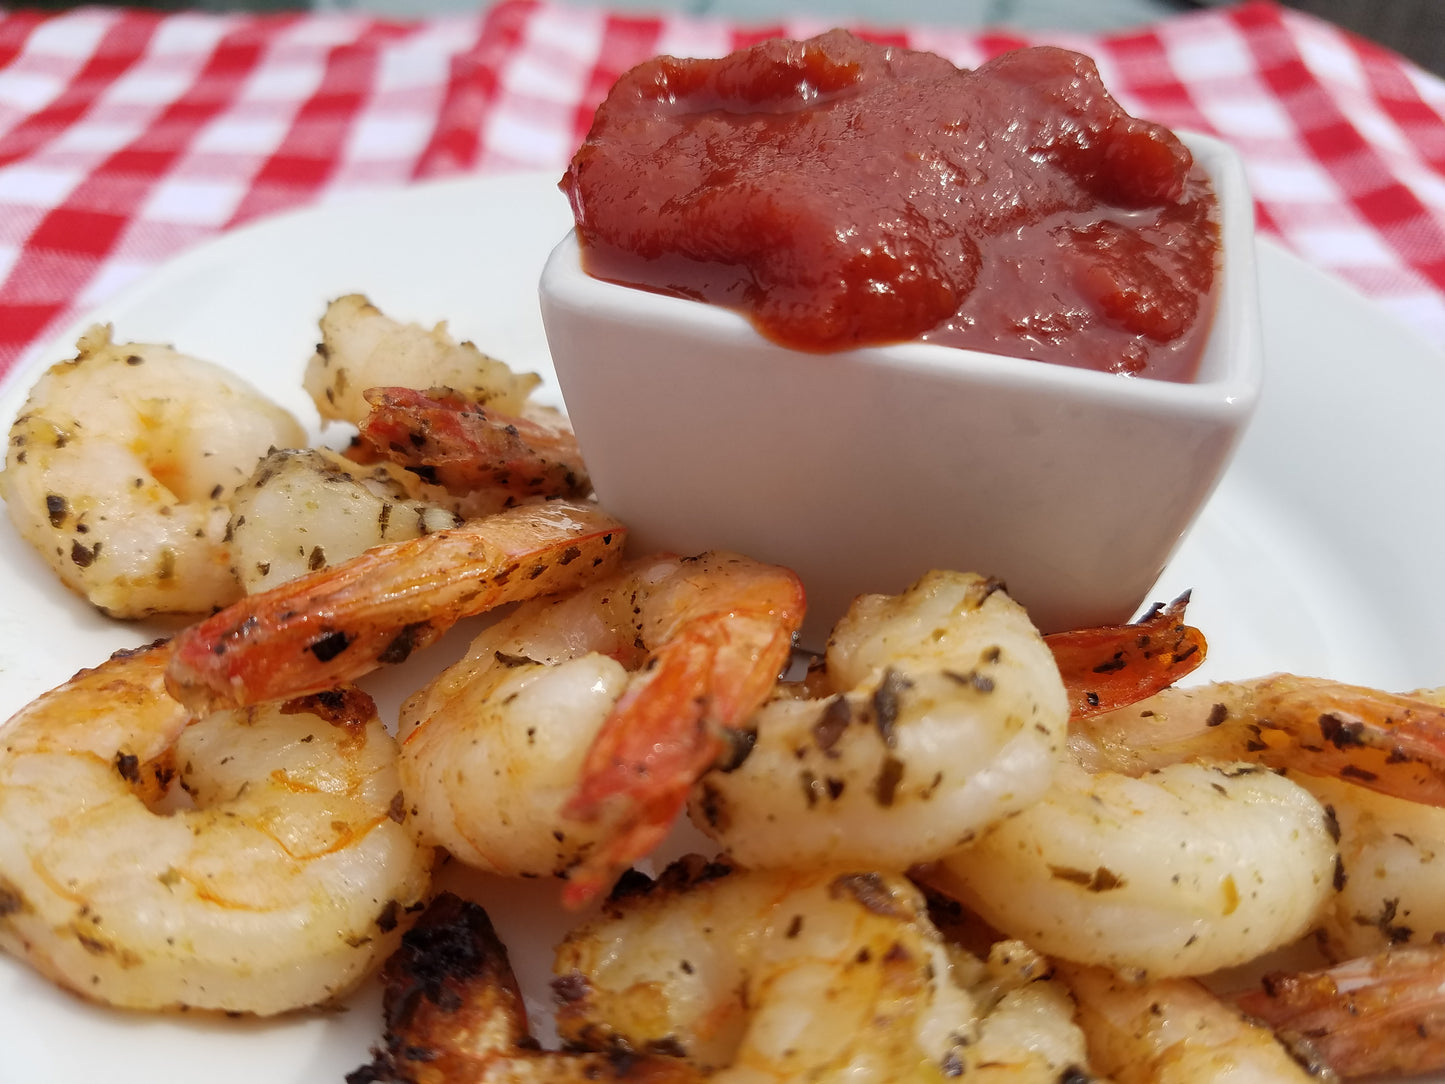 Classic Cocktail Sauce with Smoked Maine Sea Salt - Silverton Foods Best BBQ Sauces